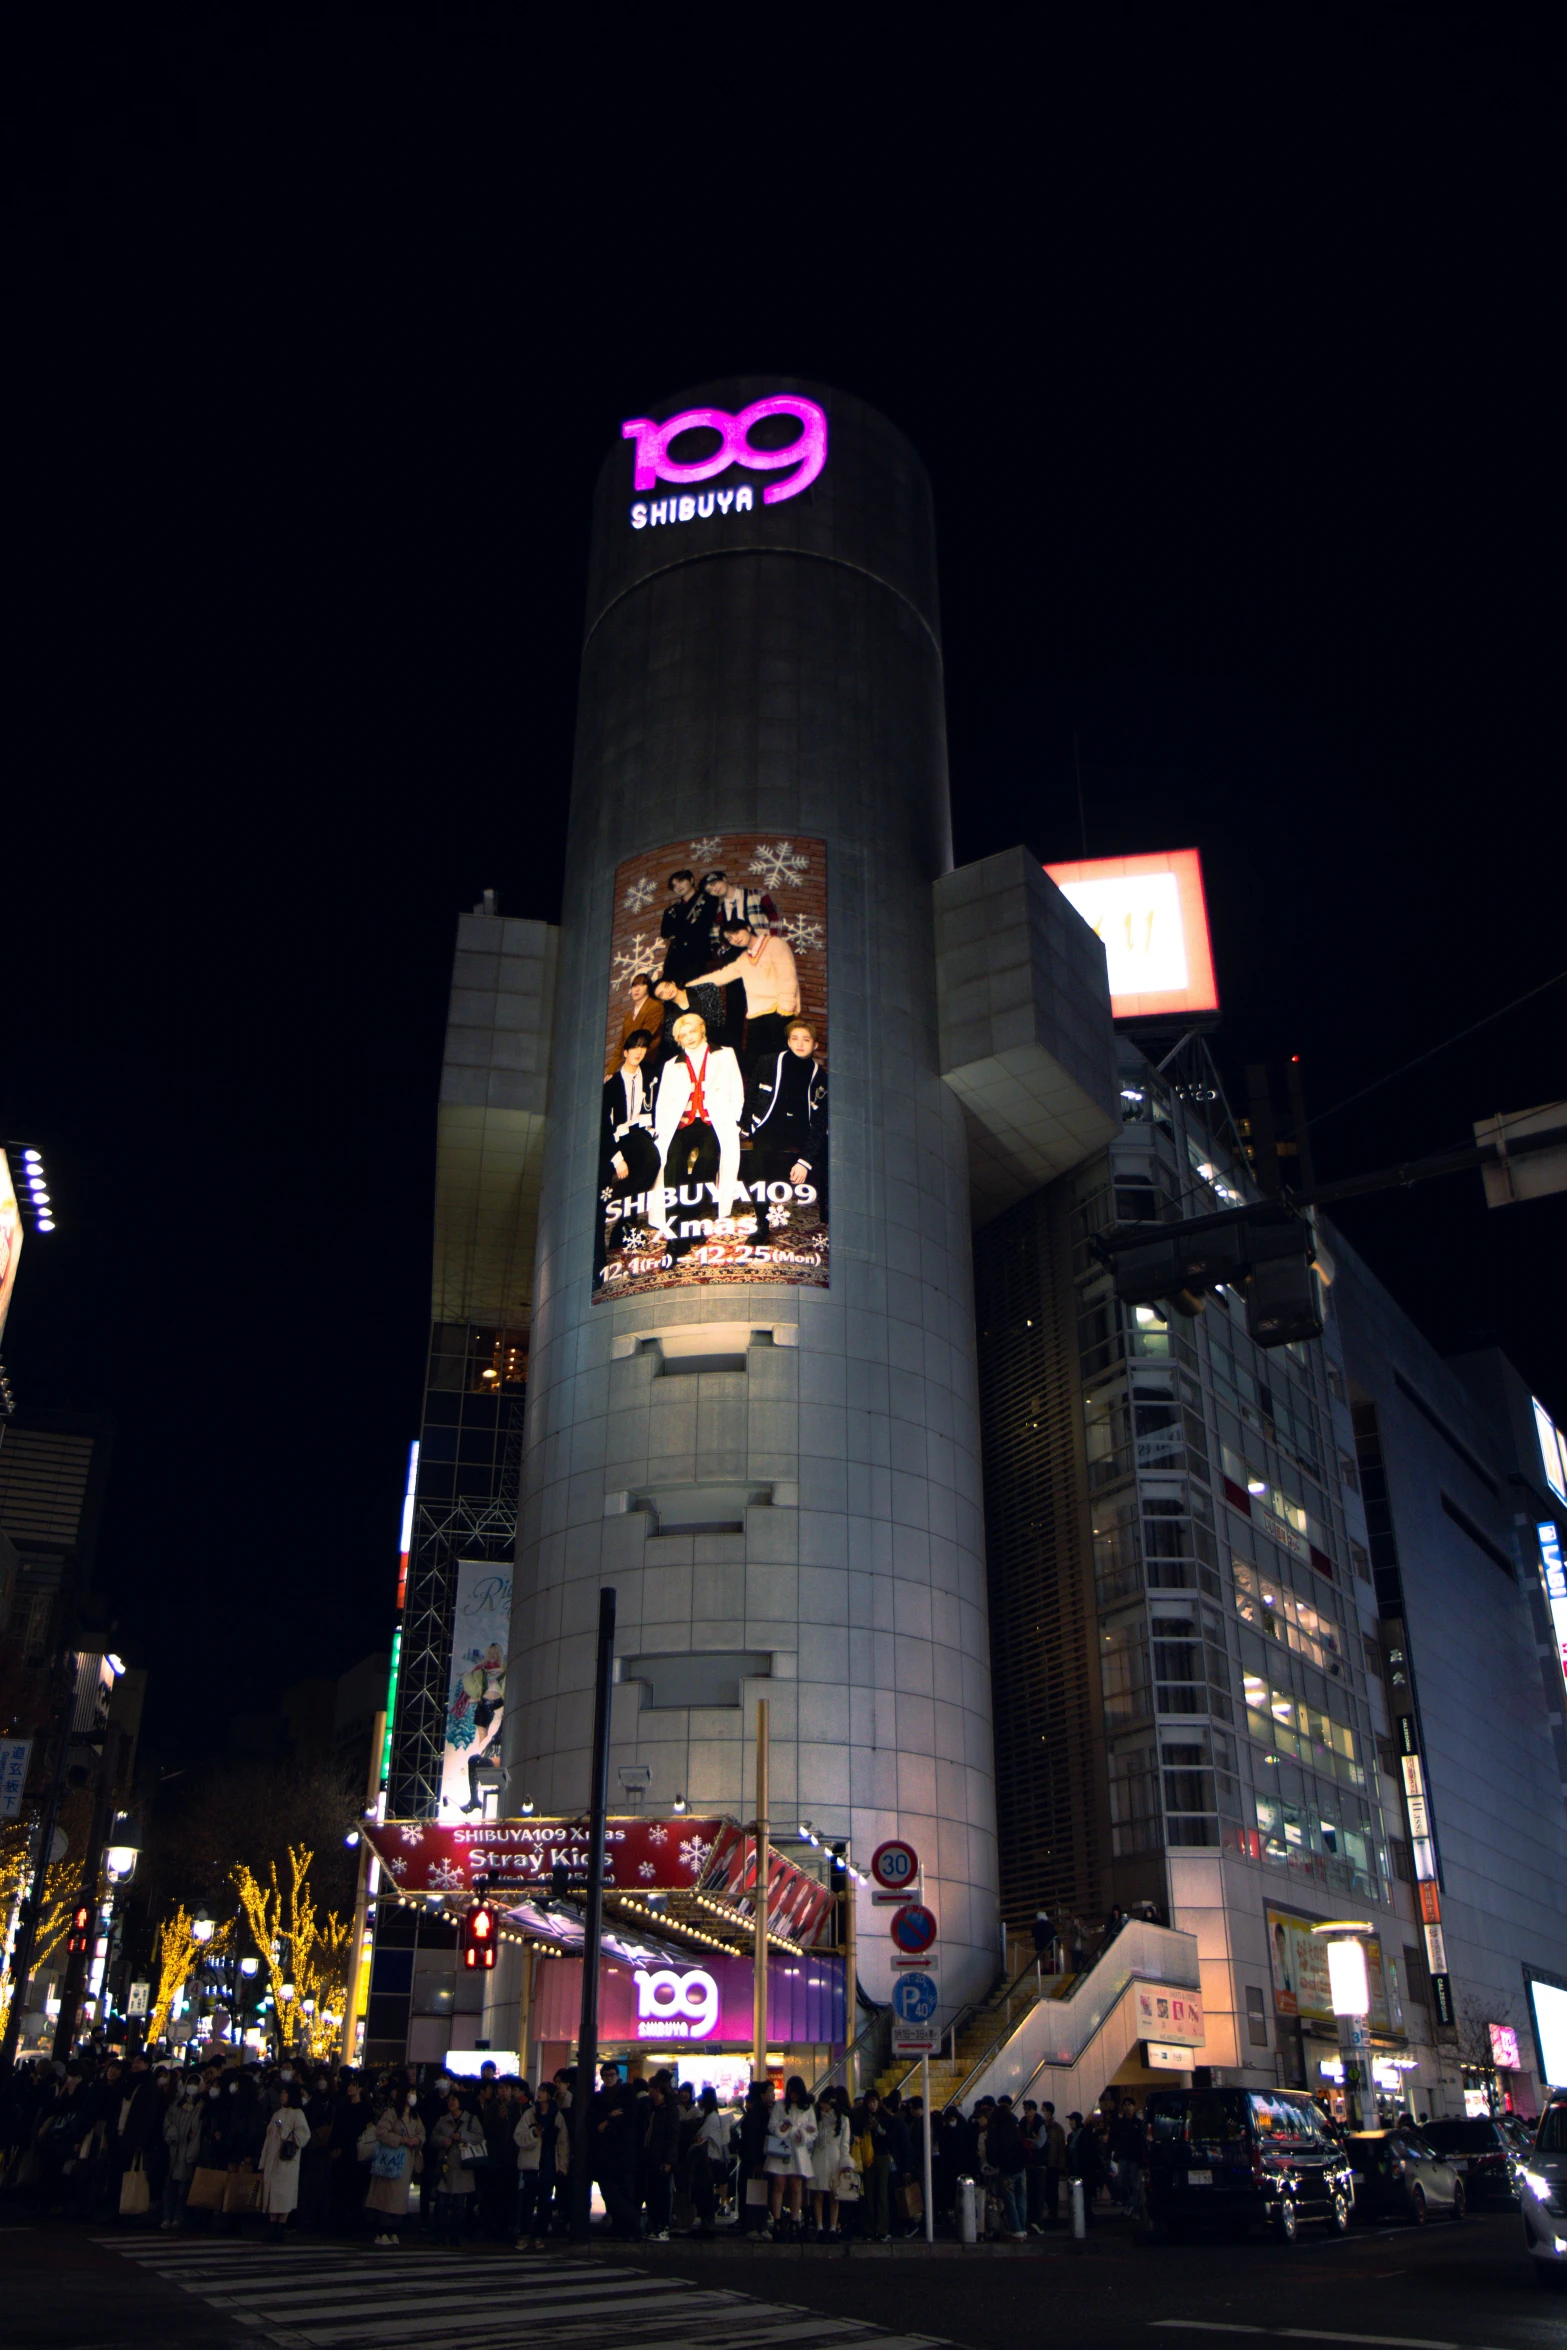 a group of people at night in front of some tall buildings